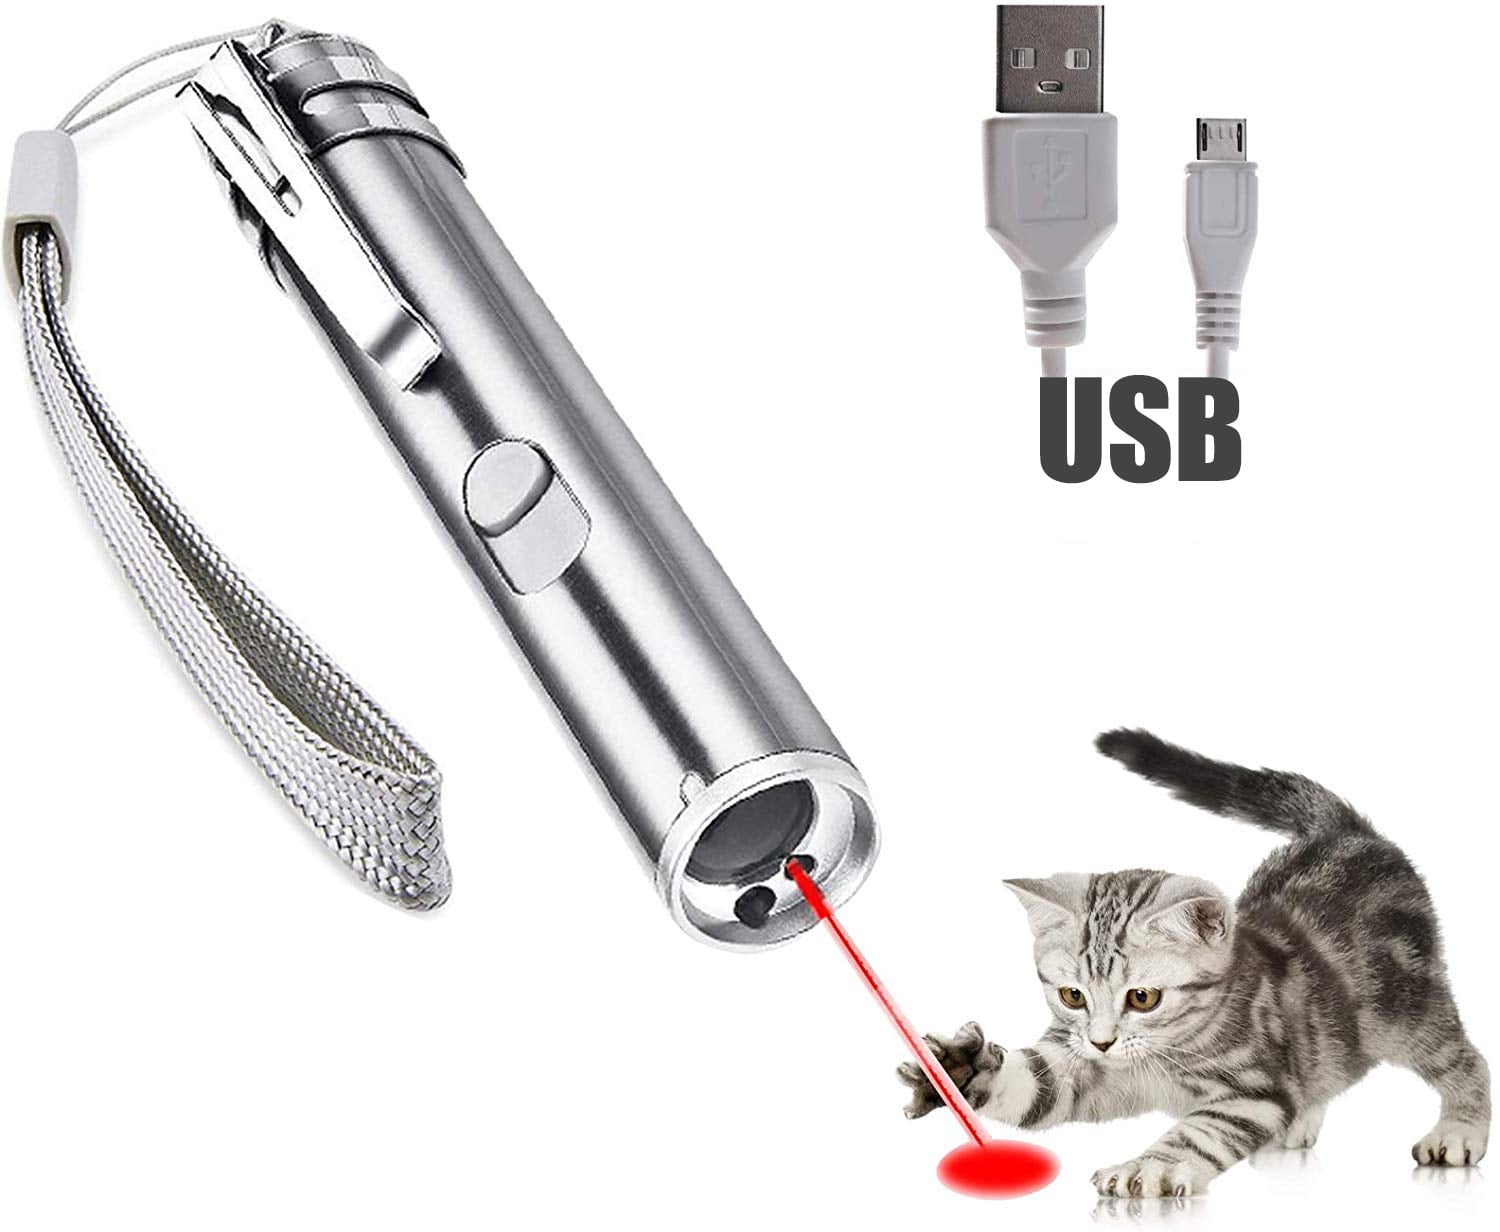 Red Laser Pointer High Power Rechargeable Lazer Pointer, Laser Pen with Long Range Adjustable Focus with Star Cap, Laser Pointer Pen Suitable for